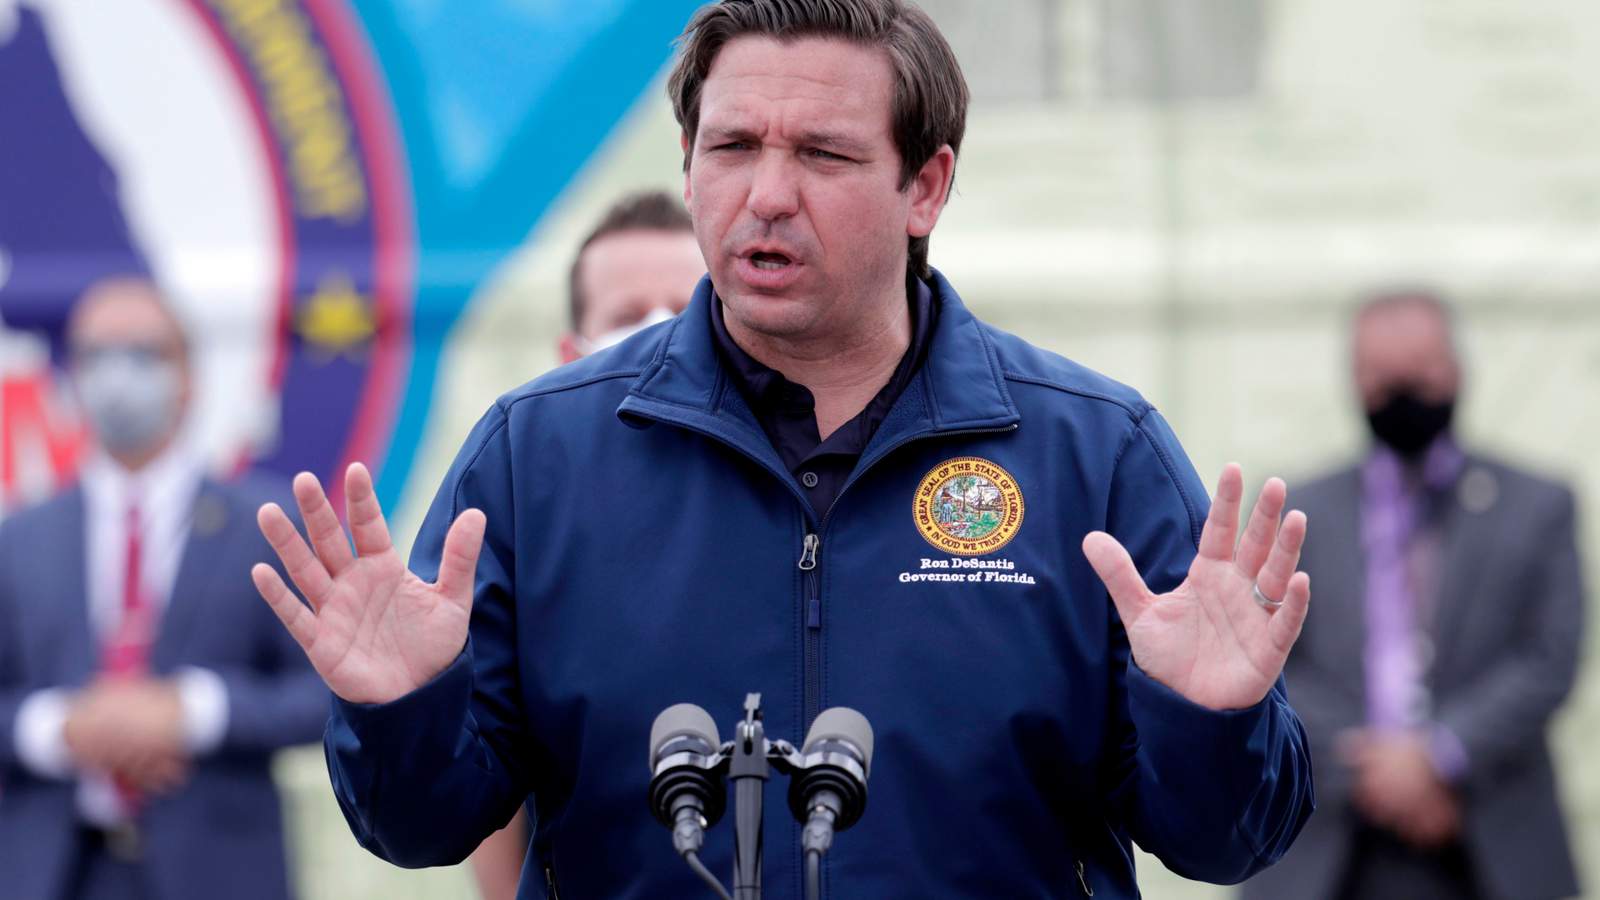 Democratic leaders press Gov. DeSantis for answers and transparency